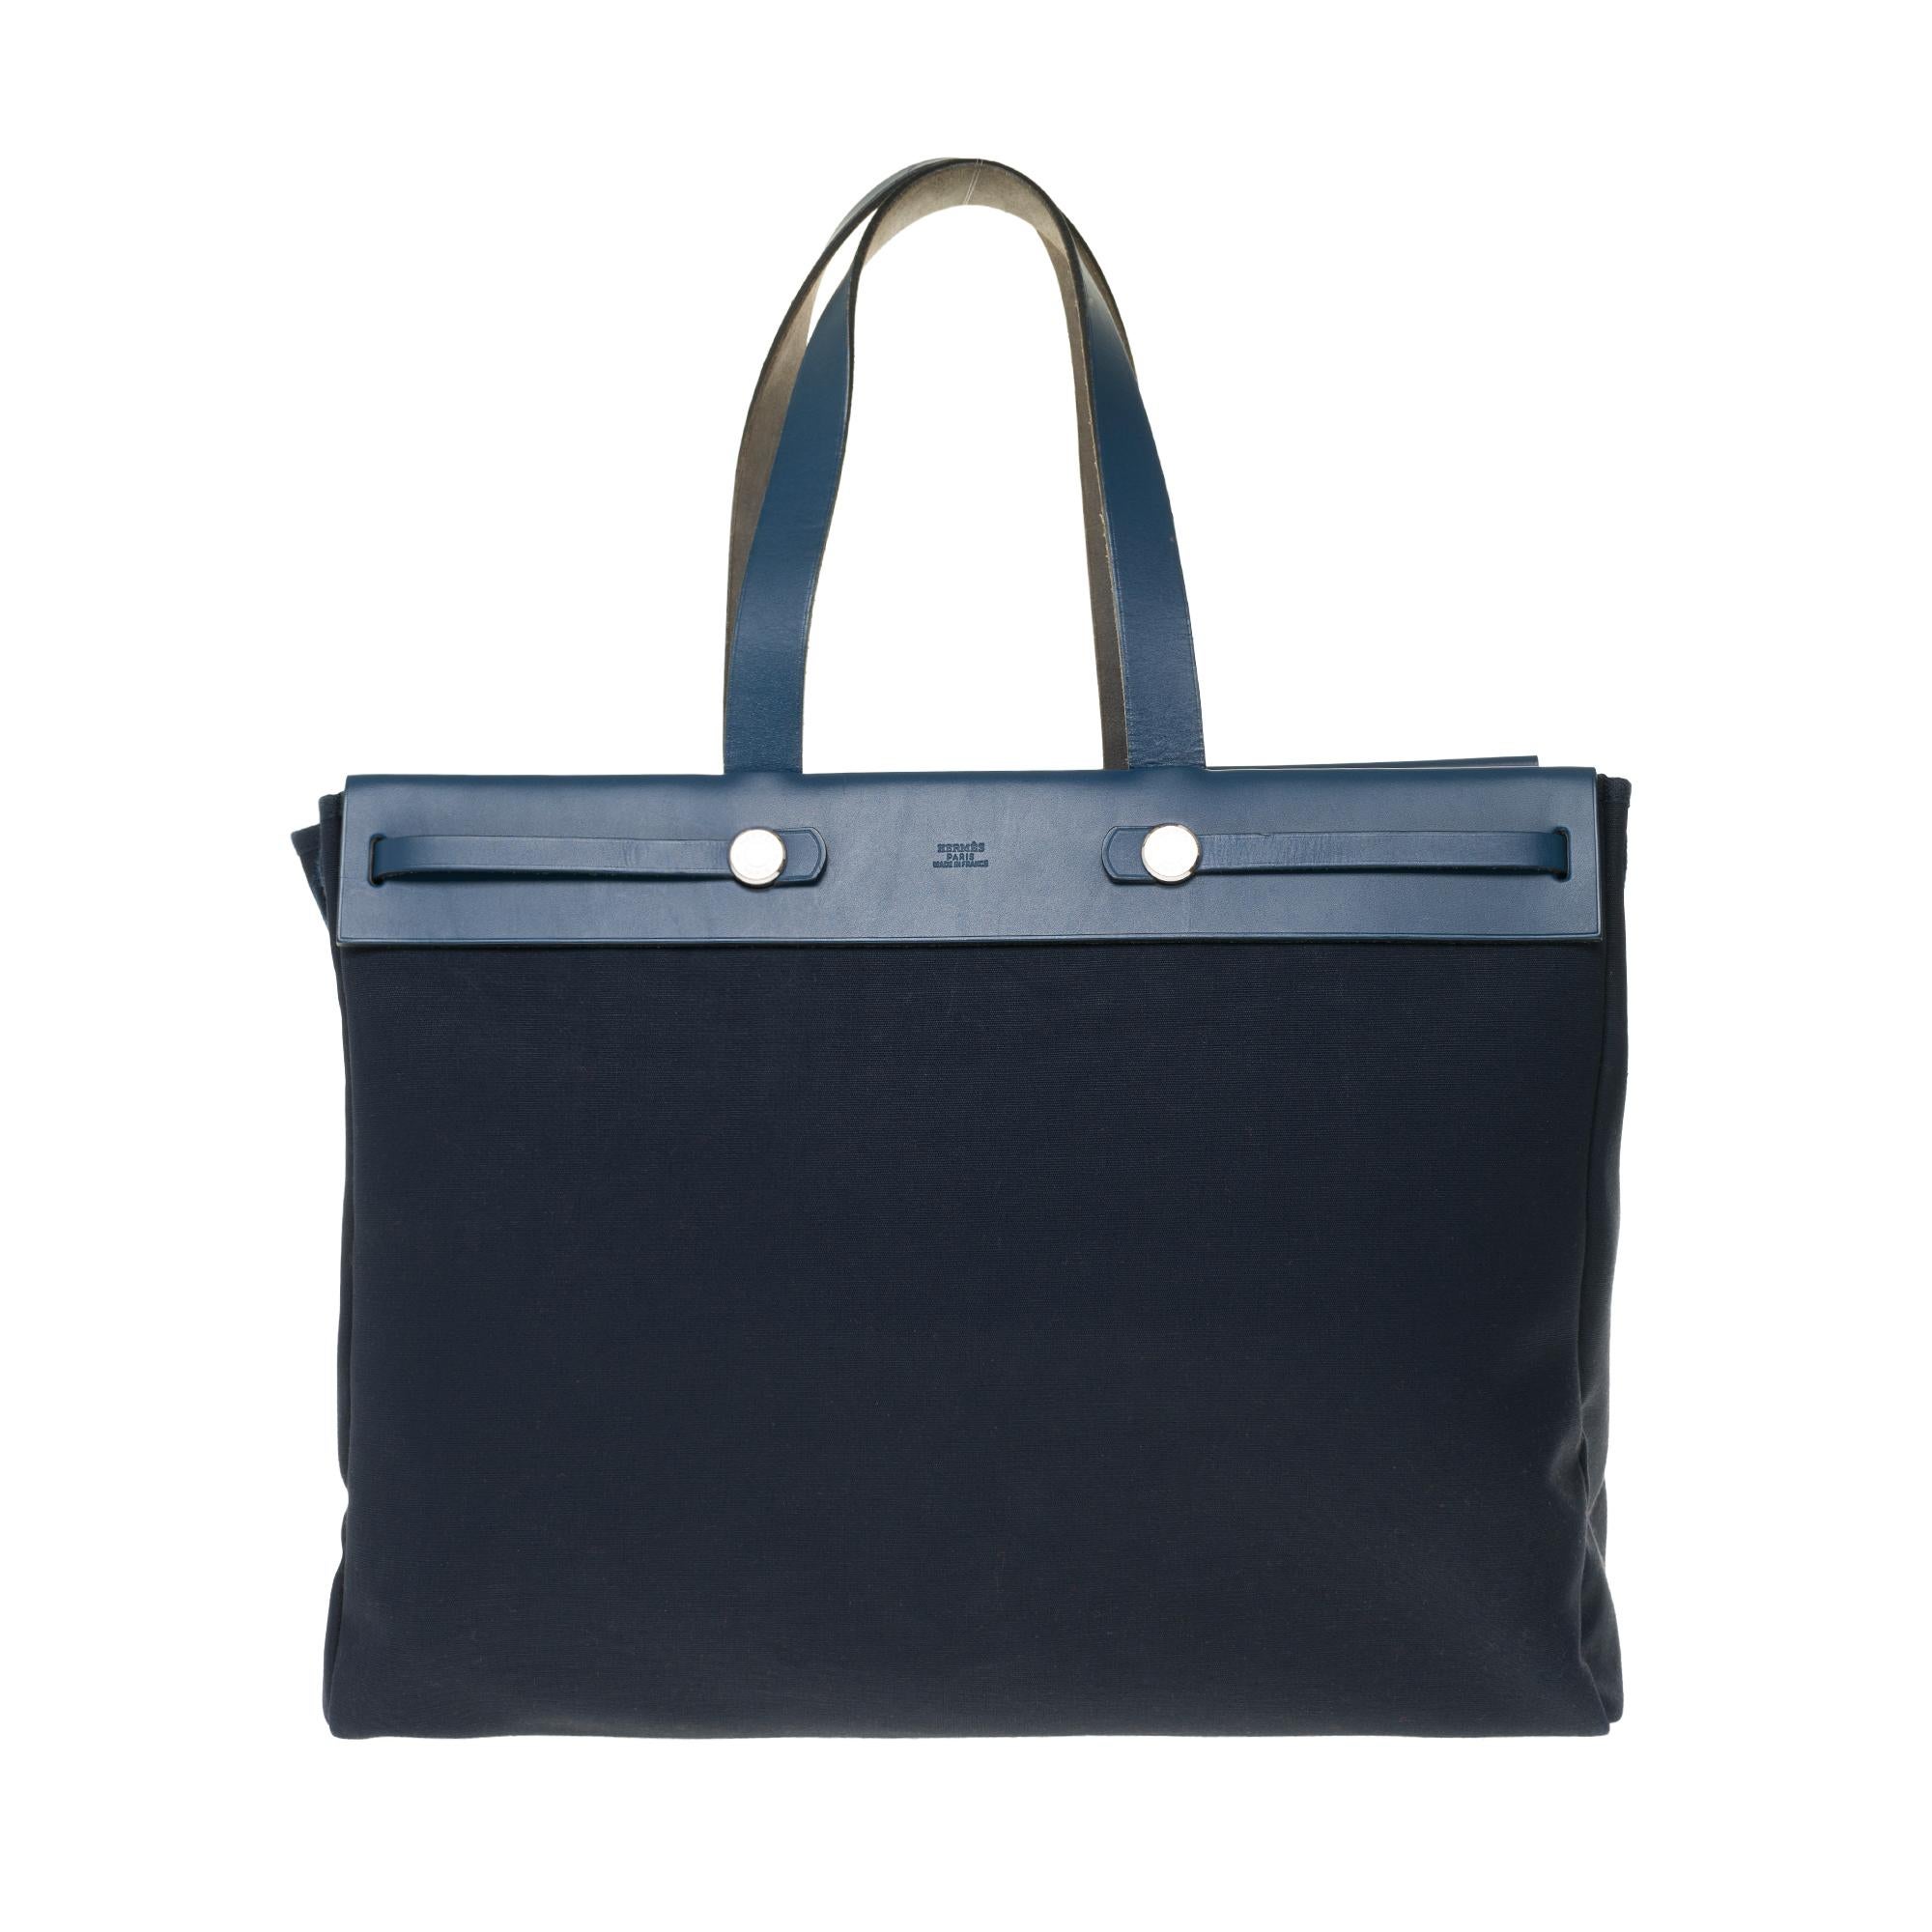 Practical Hermes Herbag GM handbag in navy blue canvas and blue leather, palladium silver metal hardware, blue leather handle, a removable black leather handle allowing a hand or shoulder support.

Strap closure on flap.
A zipped pocket on the back